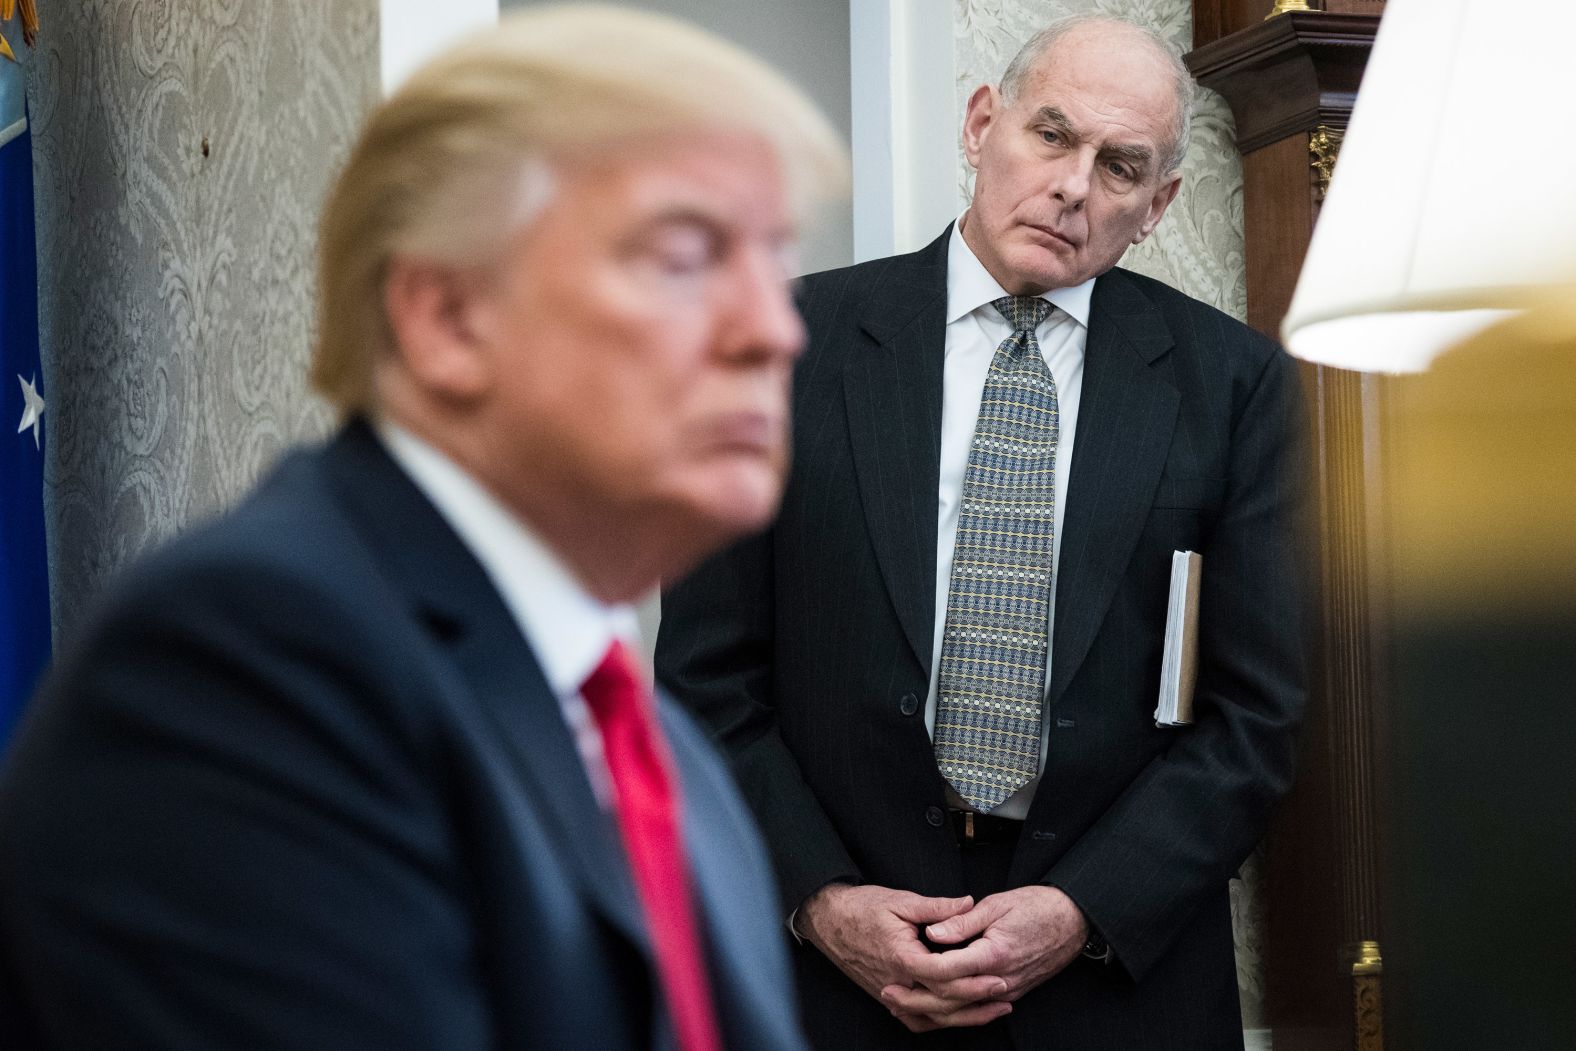 White House Chief of Staff John Kelly watches as Trump speaks during a meeting with North Korean defectors in the Oval Office on February 2. Later in the year, <a href="https://www.cnn.com/2018/12/08/politics/donald-trump-john-kelly/index.html" target="_blank">Trump announced</a> Kelly would be leaving his position. Trump noted Kelly had been with him for almost two years in his roles as chief of staff and secretary of homeland security. "I appreciate his service very much," the President said. 